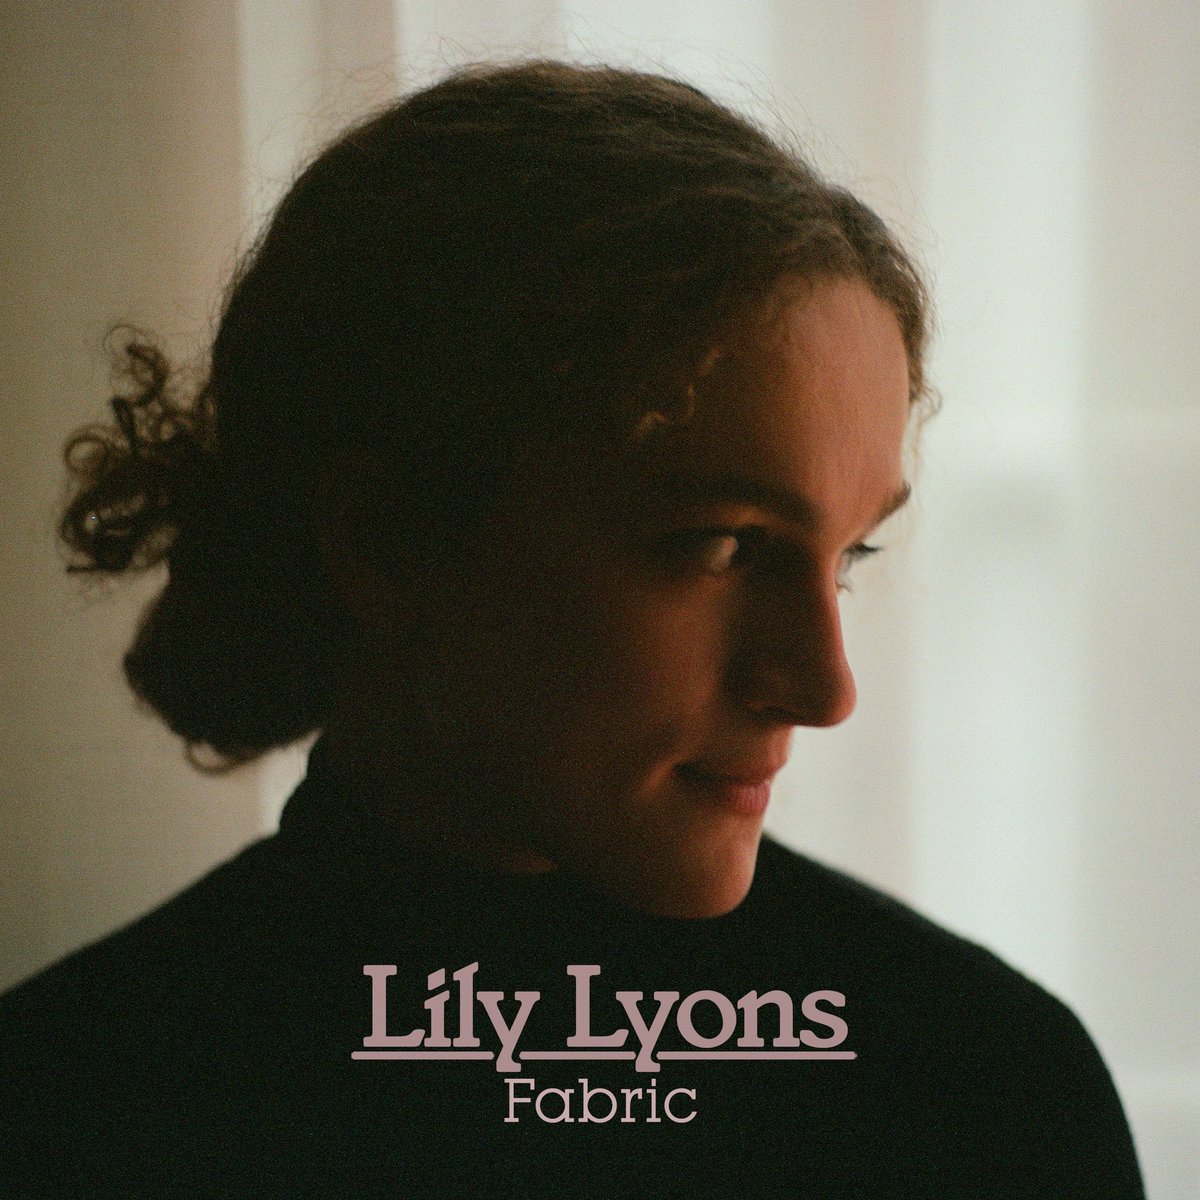 🆕 OUT NOW • The beautiful new single ‘Fabric’ from singer-songwriter @lilylyonsmusic is out now 🌻Listen now > LilyLyons.lnk.to/FabricTW